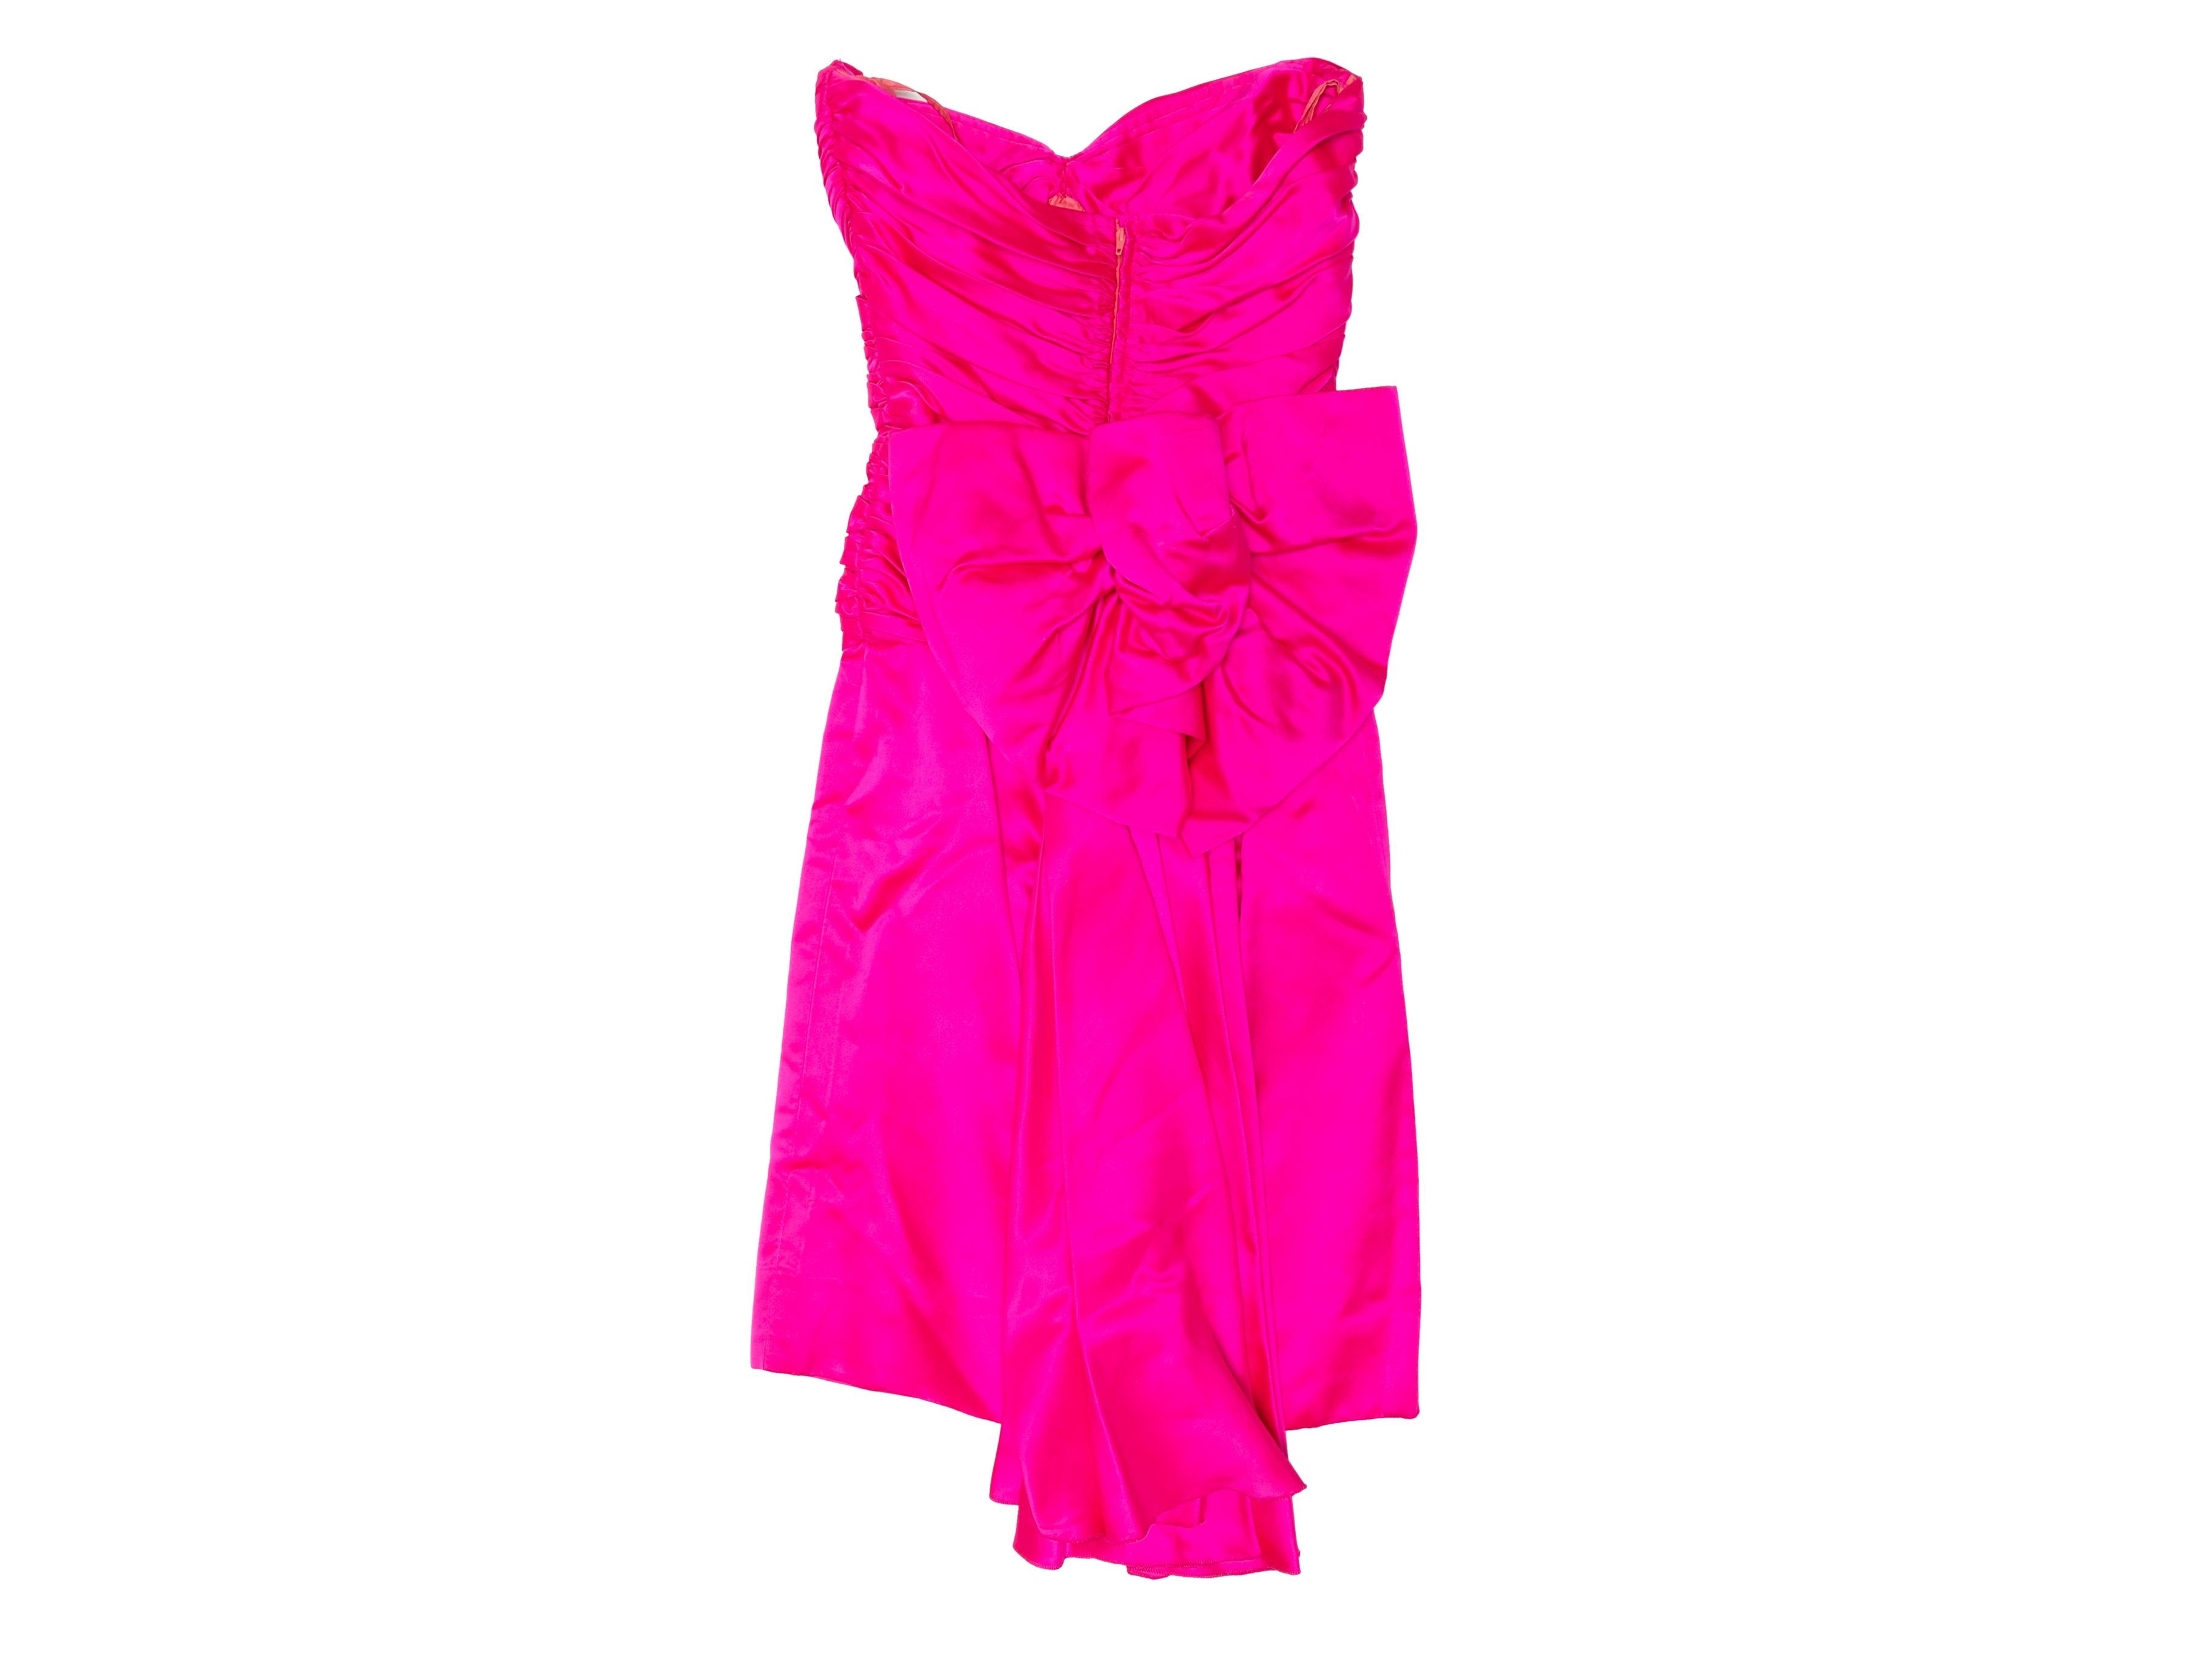 Vintage hot pink silk strapless party dress by Vicky Tiel. Circa 1980s. Sweetheart neckline. Oversized bow at back. Zip closure at center back. 26